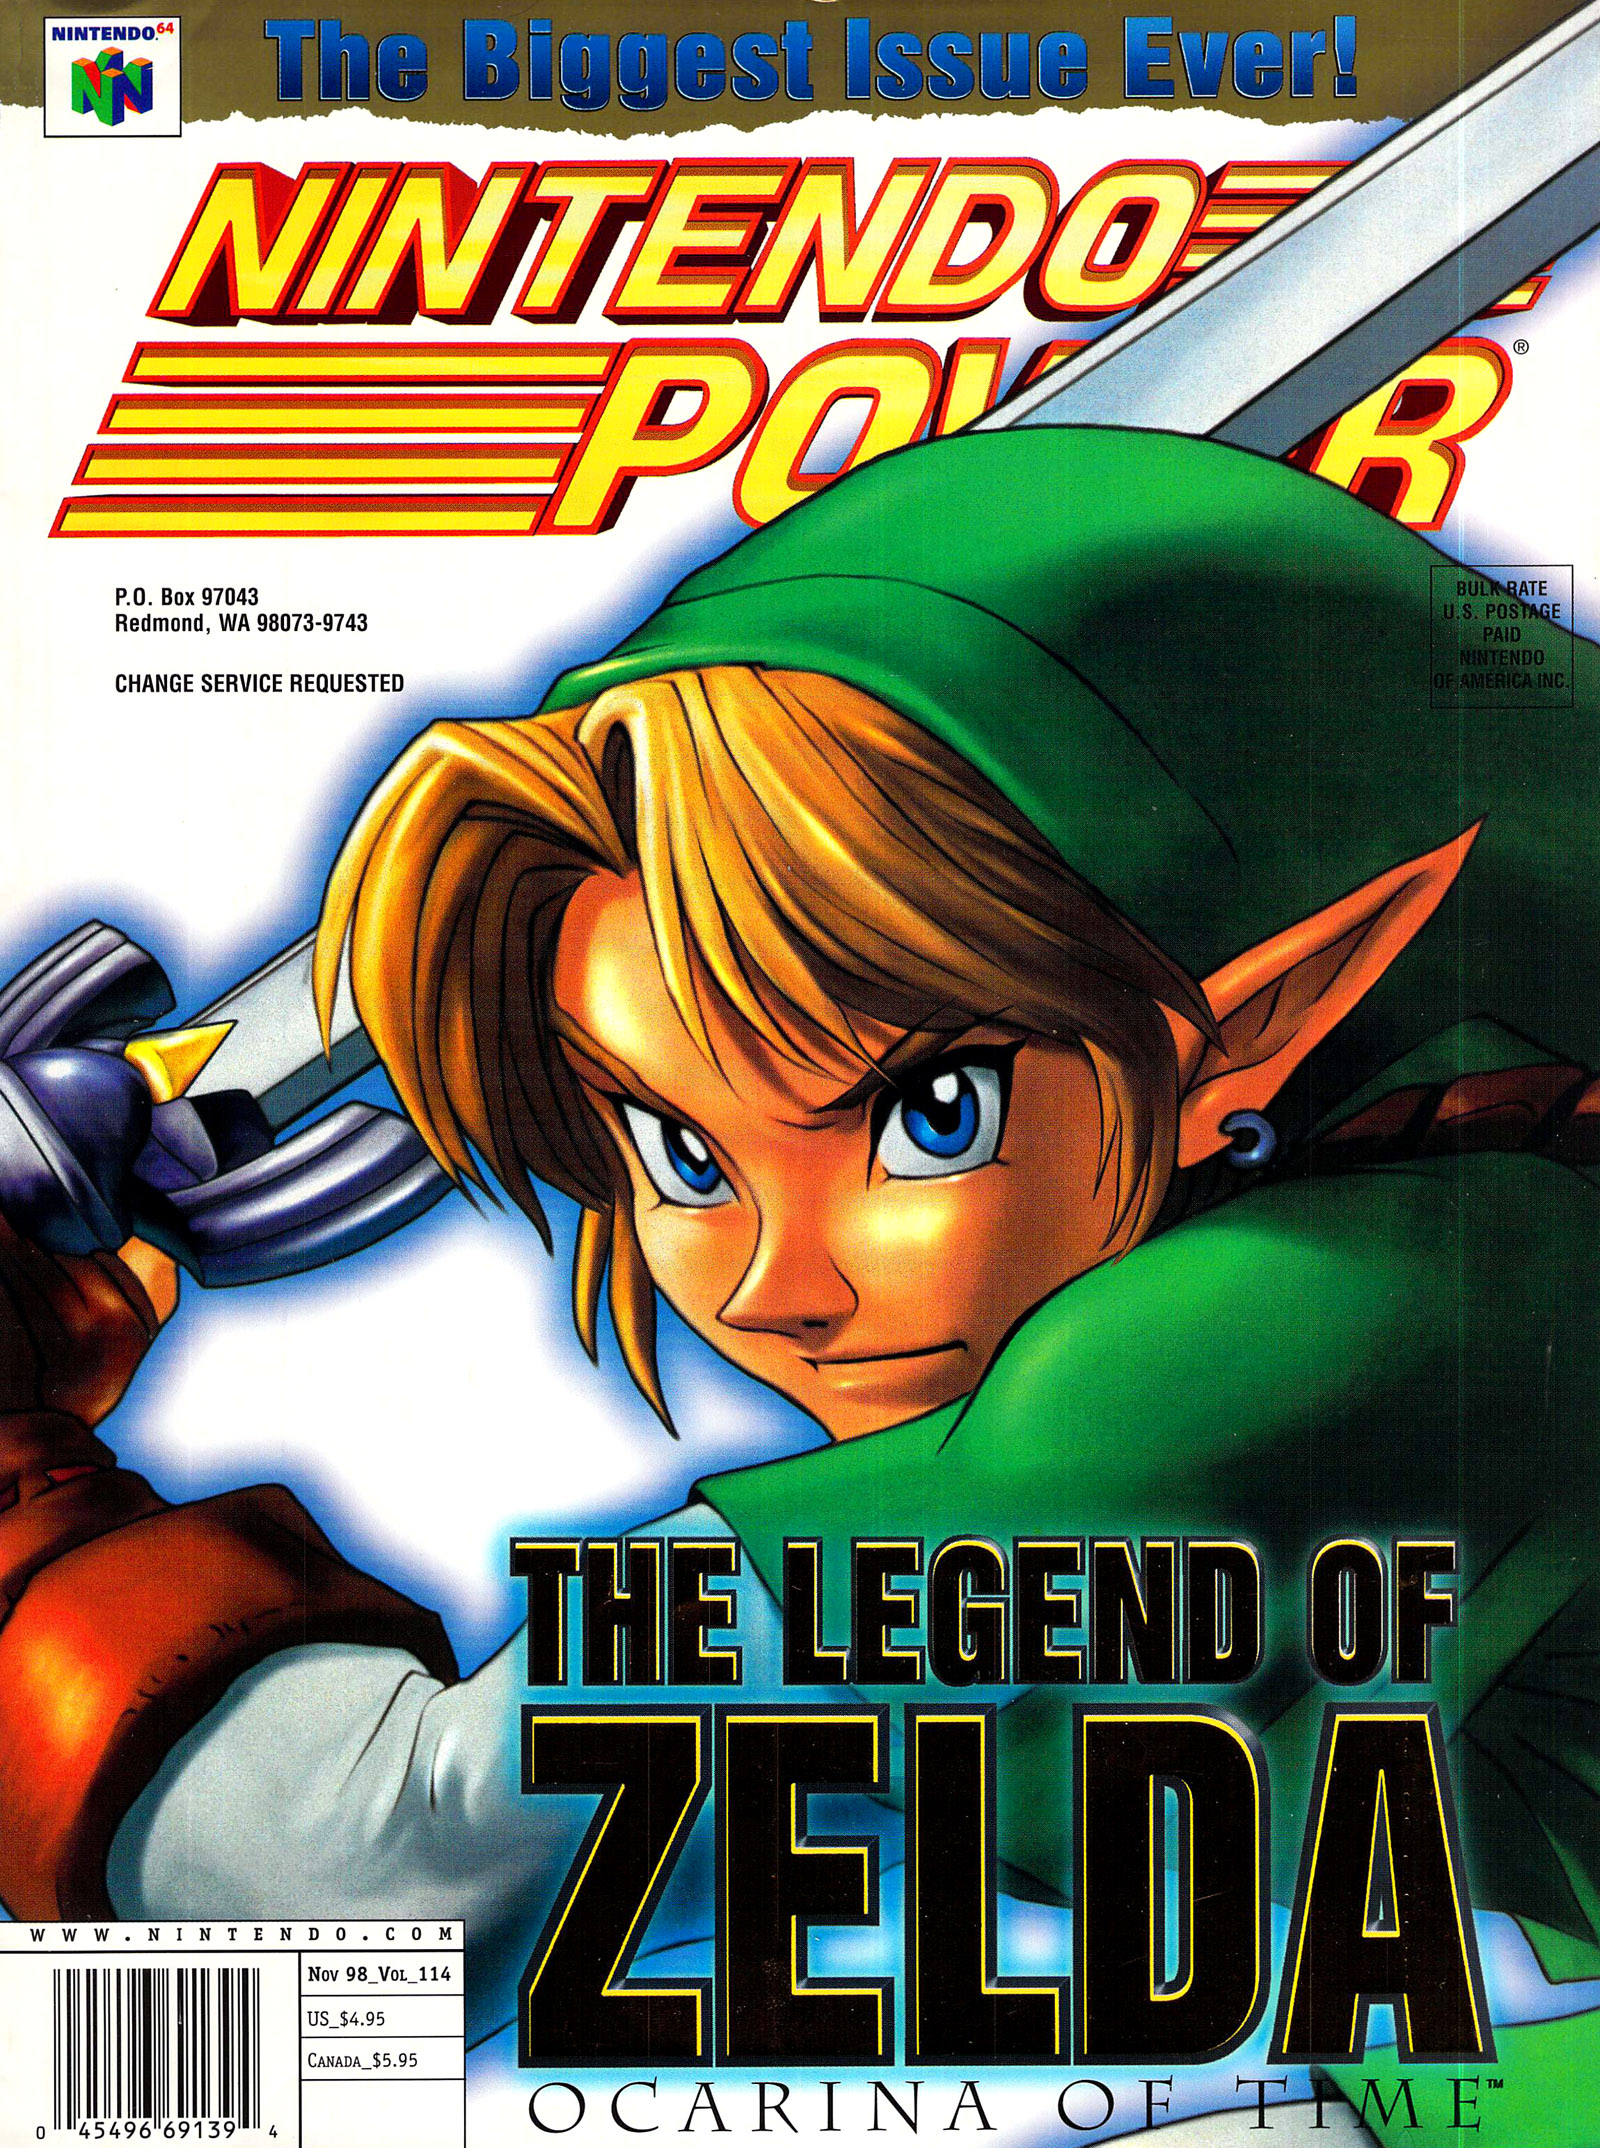 Issue 114 of Nintendo Power featuring Ocarina of Time